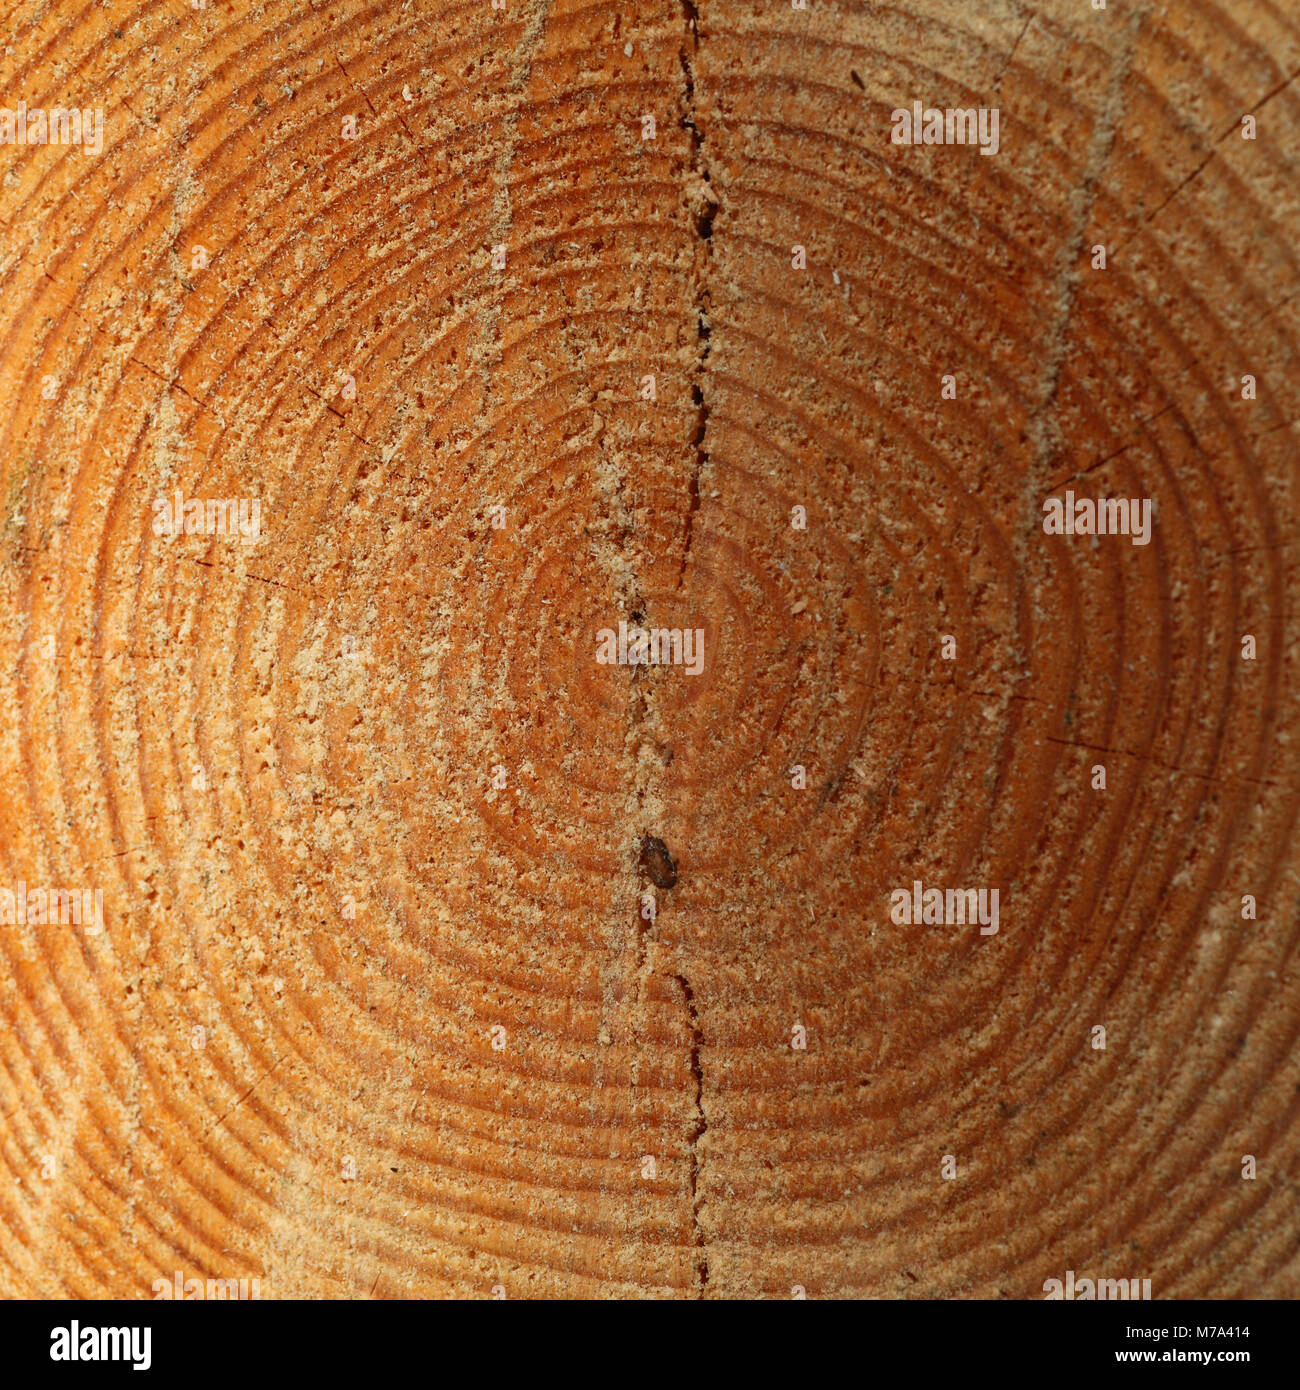 Tree growth rings on a sawn tree trunk. Stock Photo